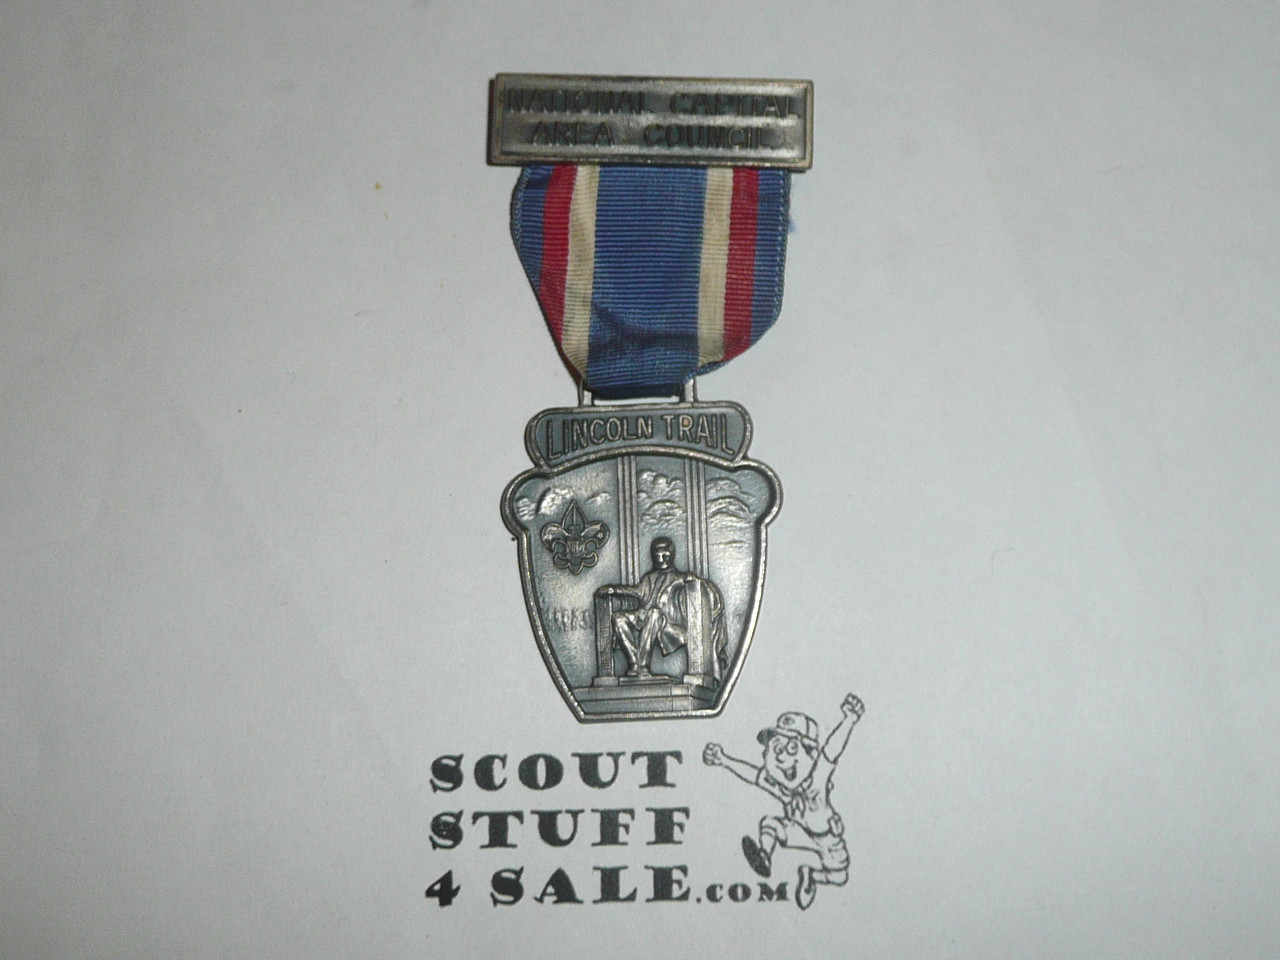 Lincoln Trail Medal with National Capital Area Council Top